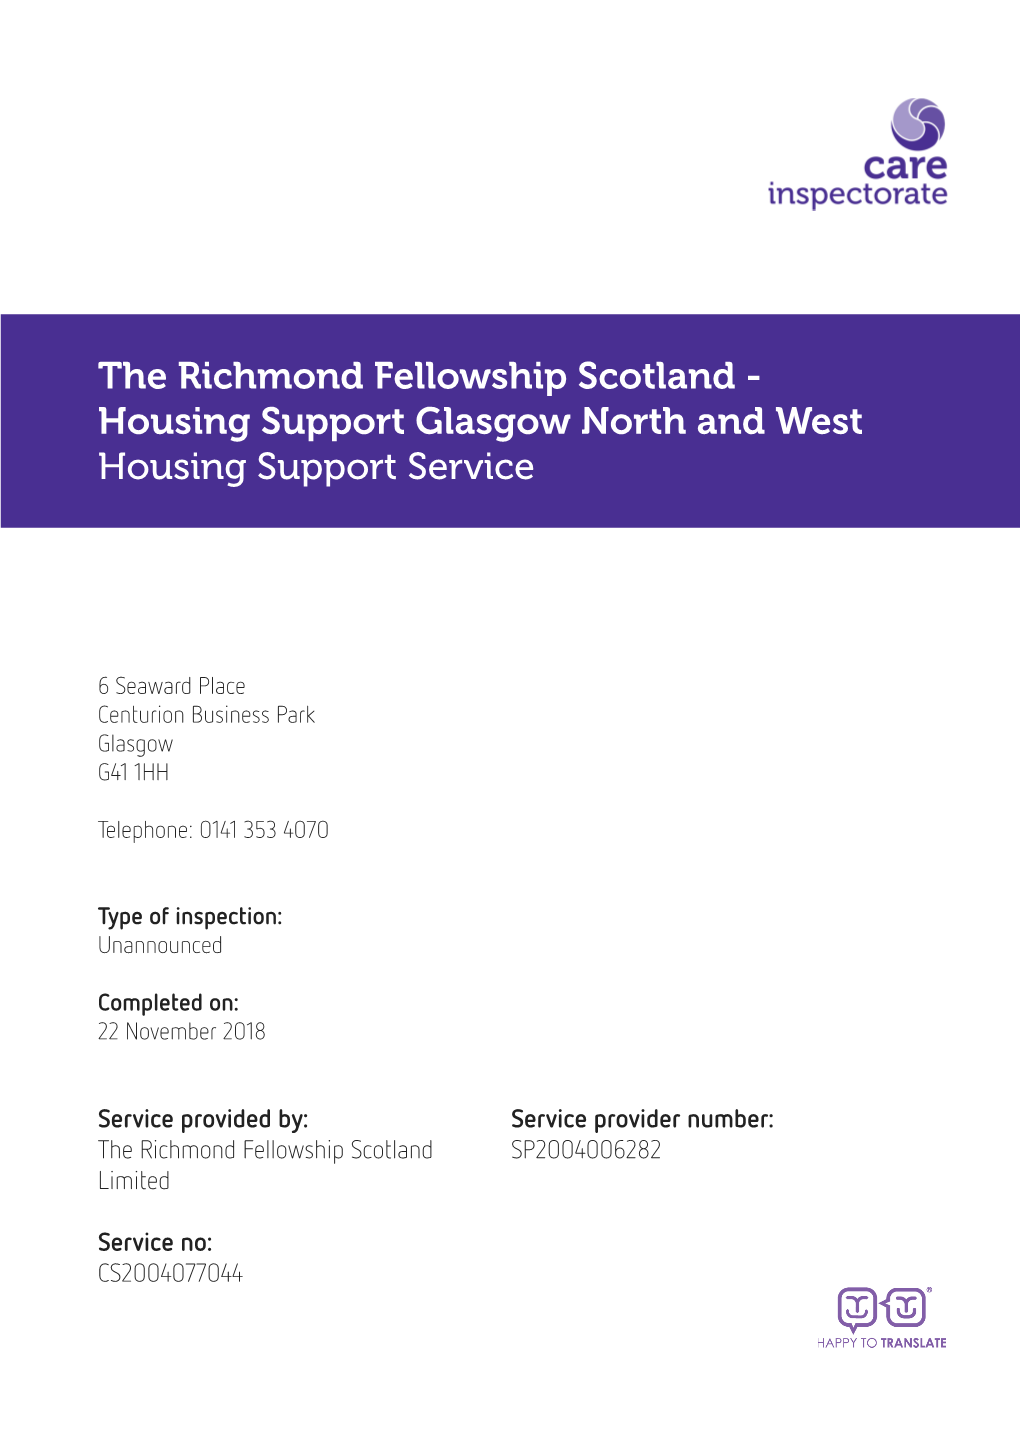 The Richmond Fellowship Scotland - Housing Support Glasgow North and West Housing Support Service